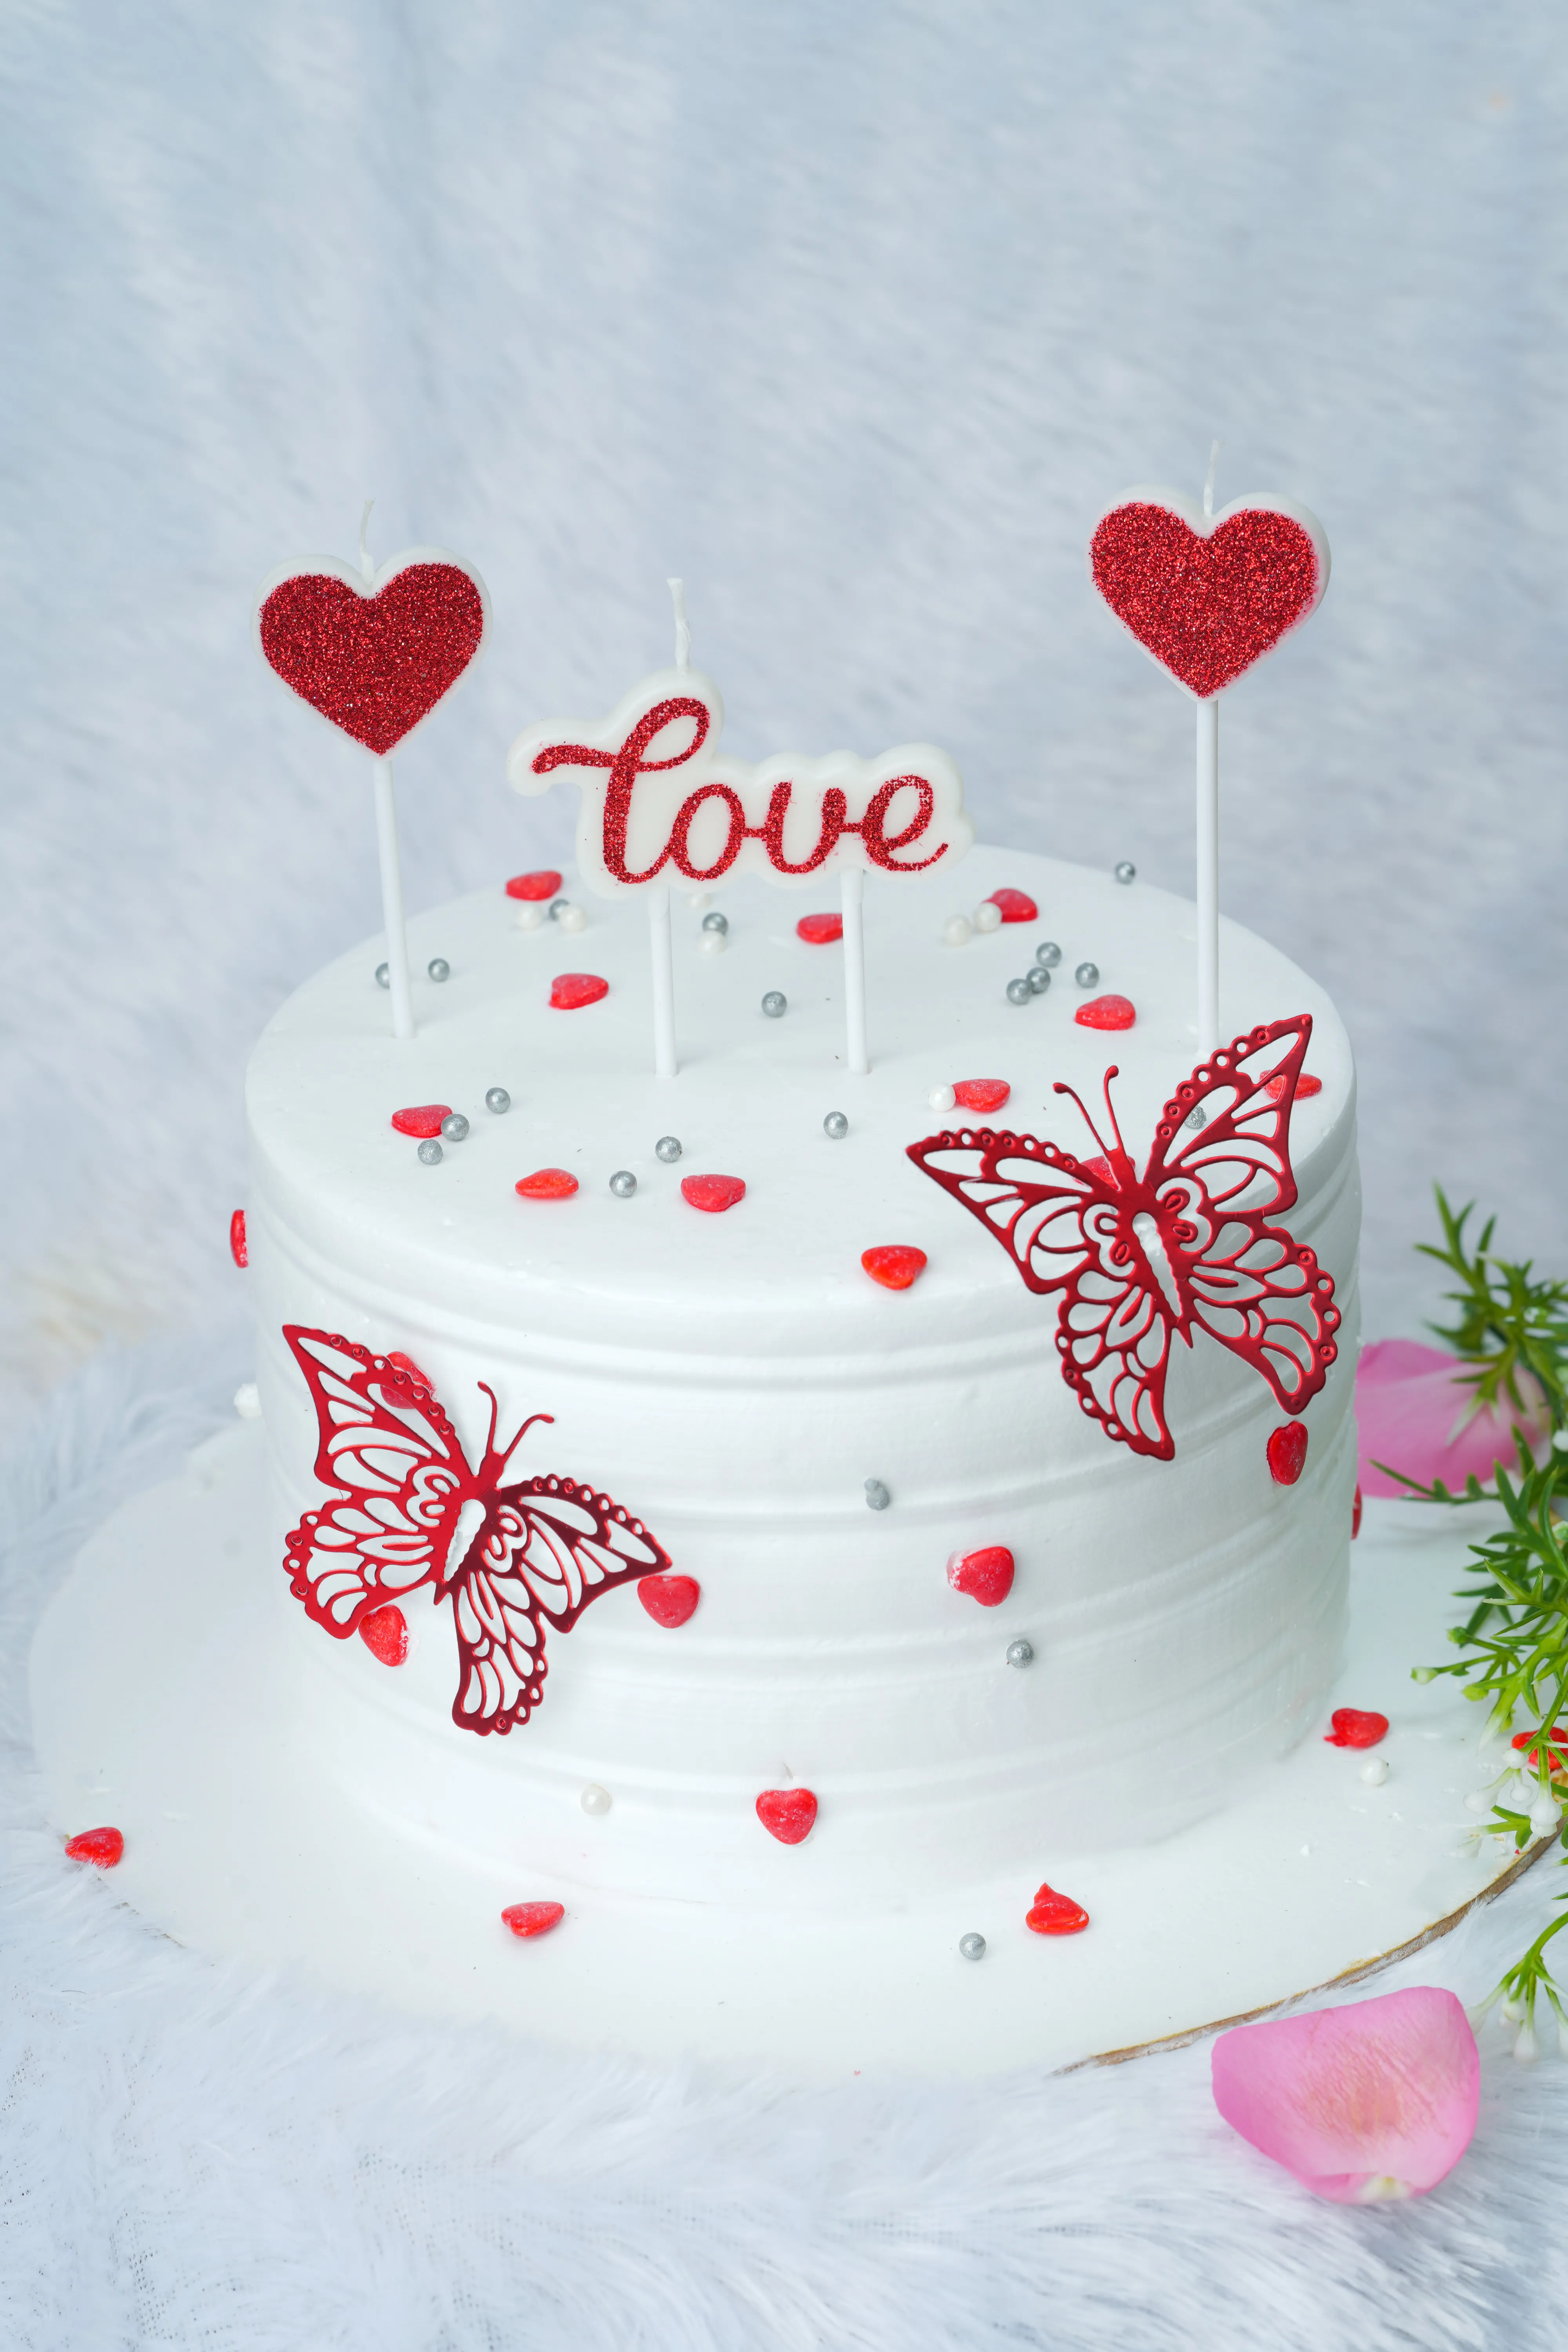 5 Things To Remember When Gifting Anniversary Cakes Online - #1 Gifting  Portal In India - Better Gift Flowers